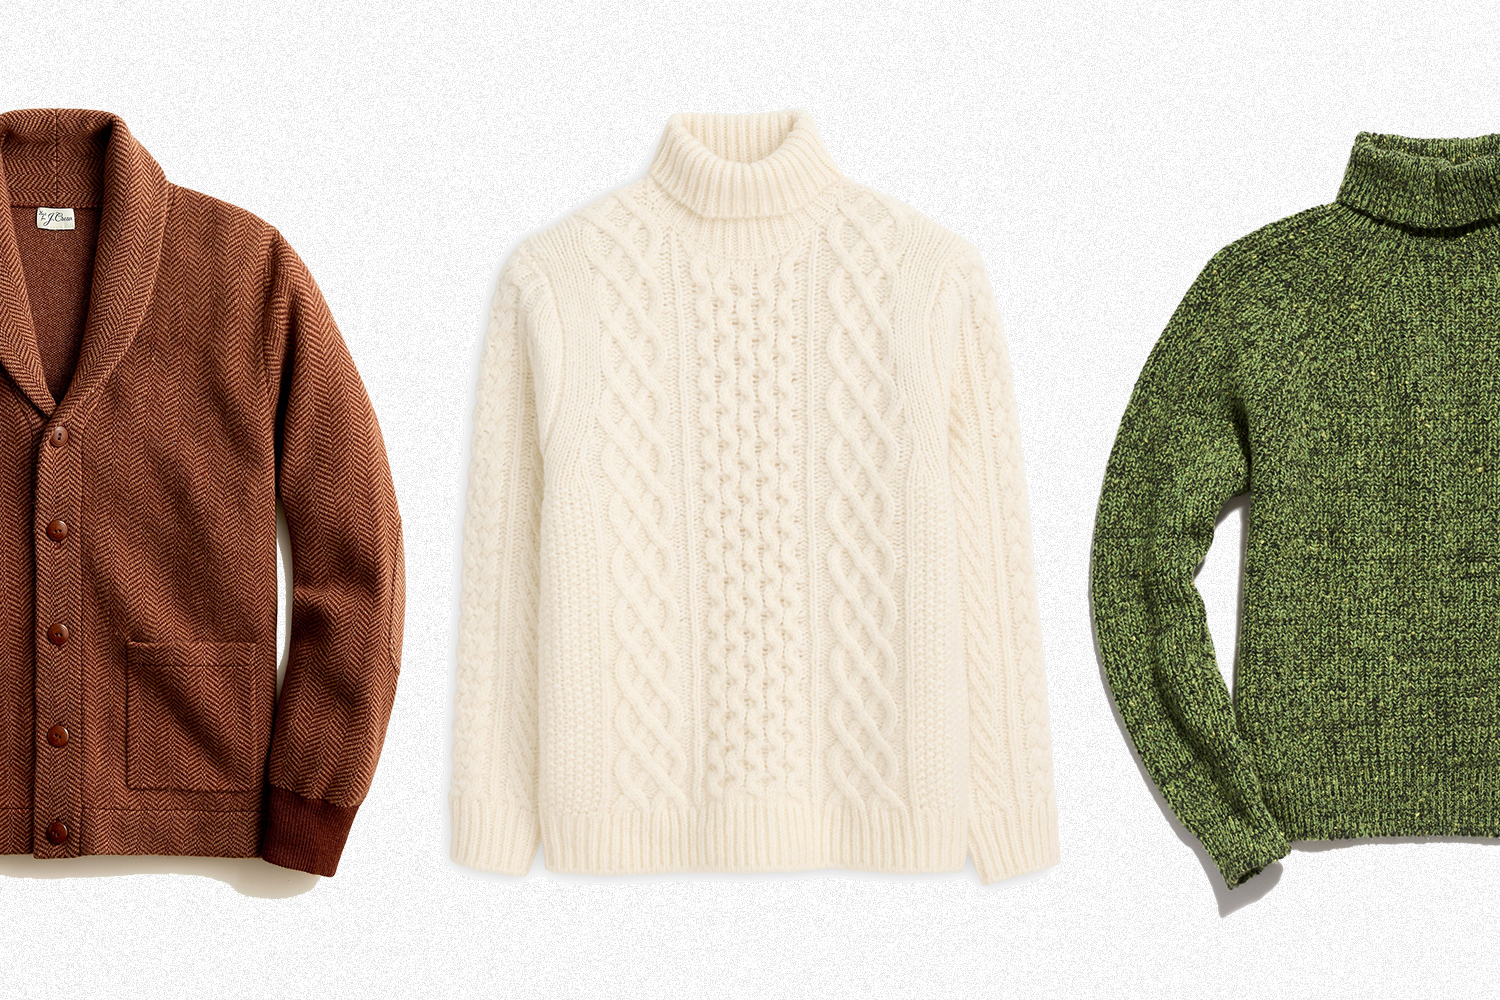 Three perfect Thanksgiving sweaters for men, a cardigan from J.Crew, a cable-knit from Alex Mill and a turtleneck from Inis Meáin